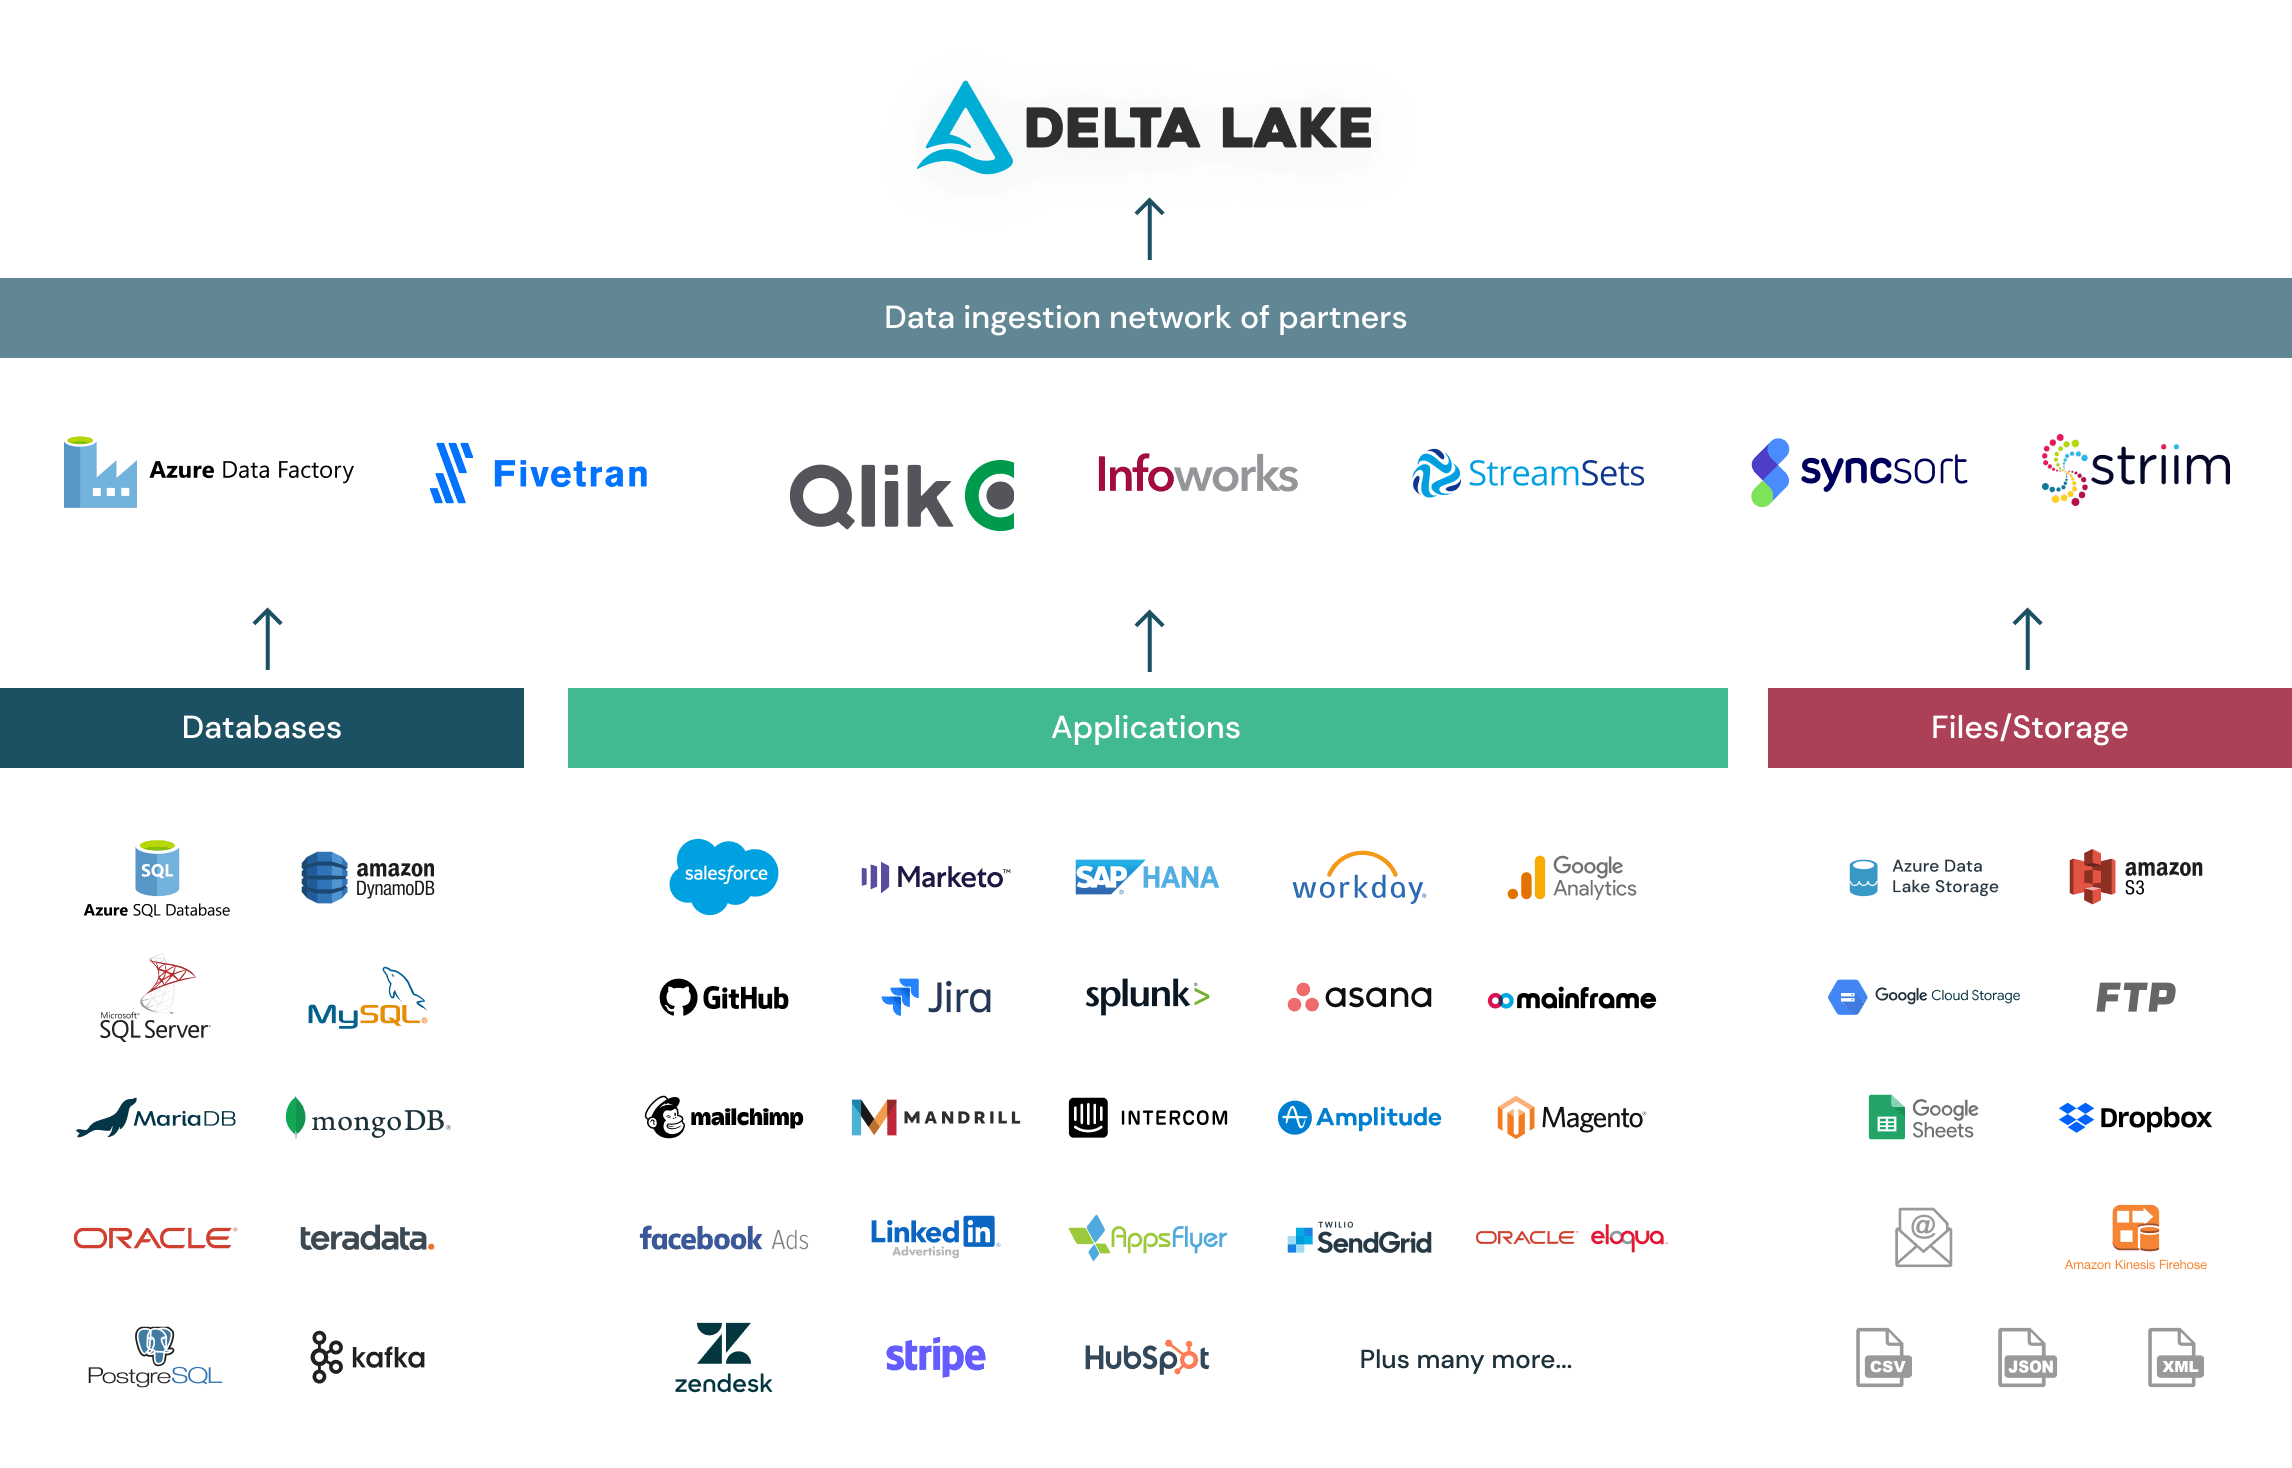 Network of partners